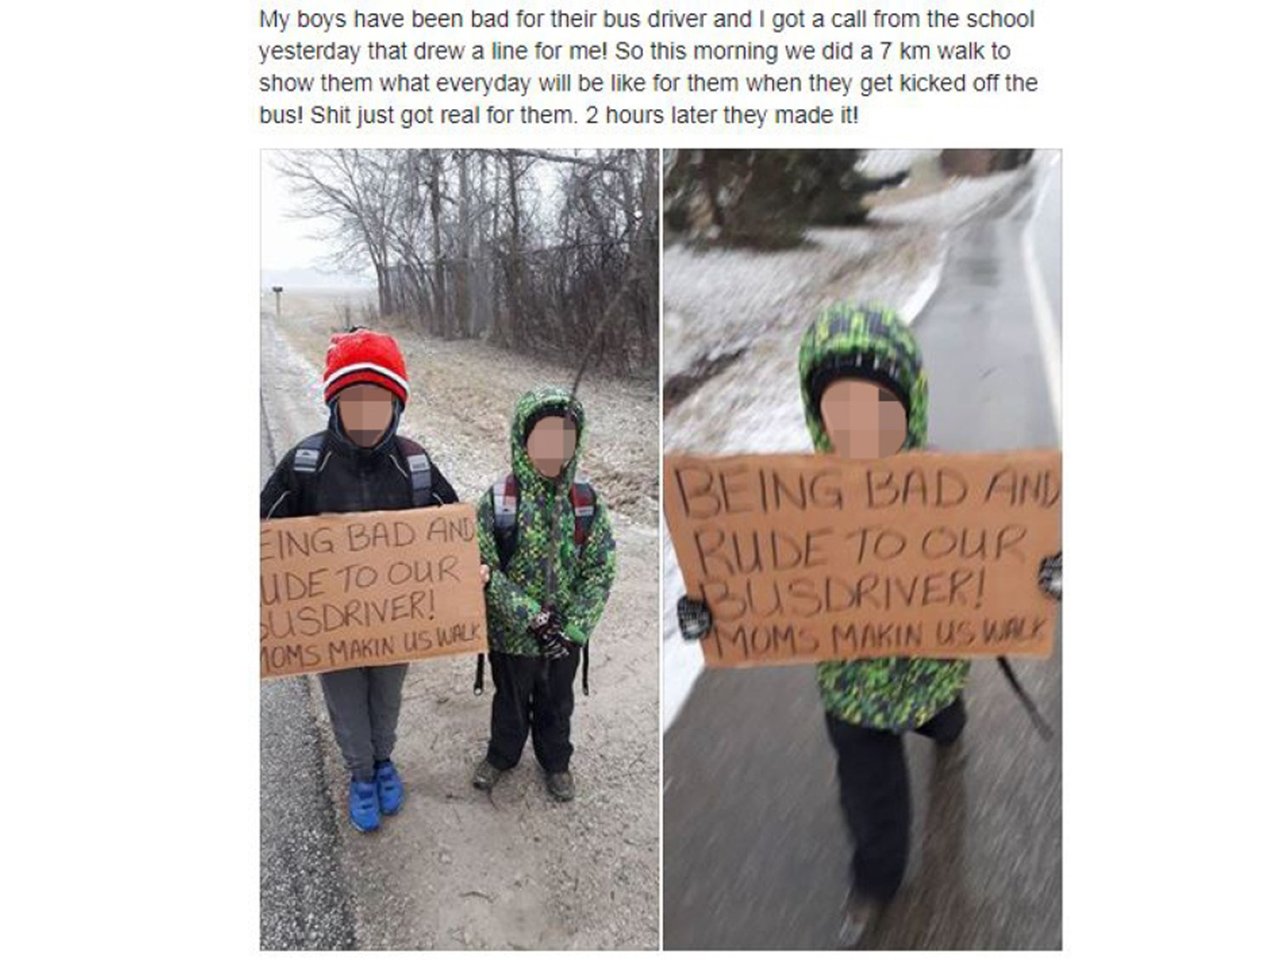 Screenshot of post from mom who made her kids walk to school holding a sign saying they were being rude to the bus driver